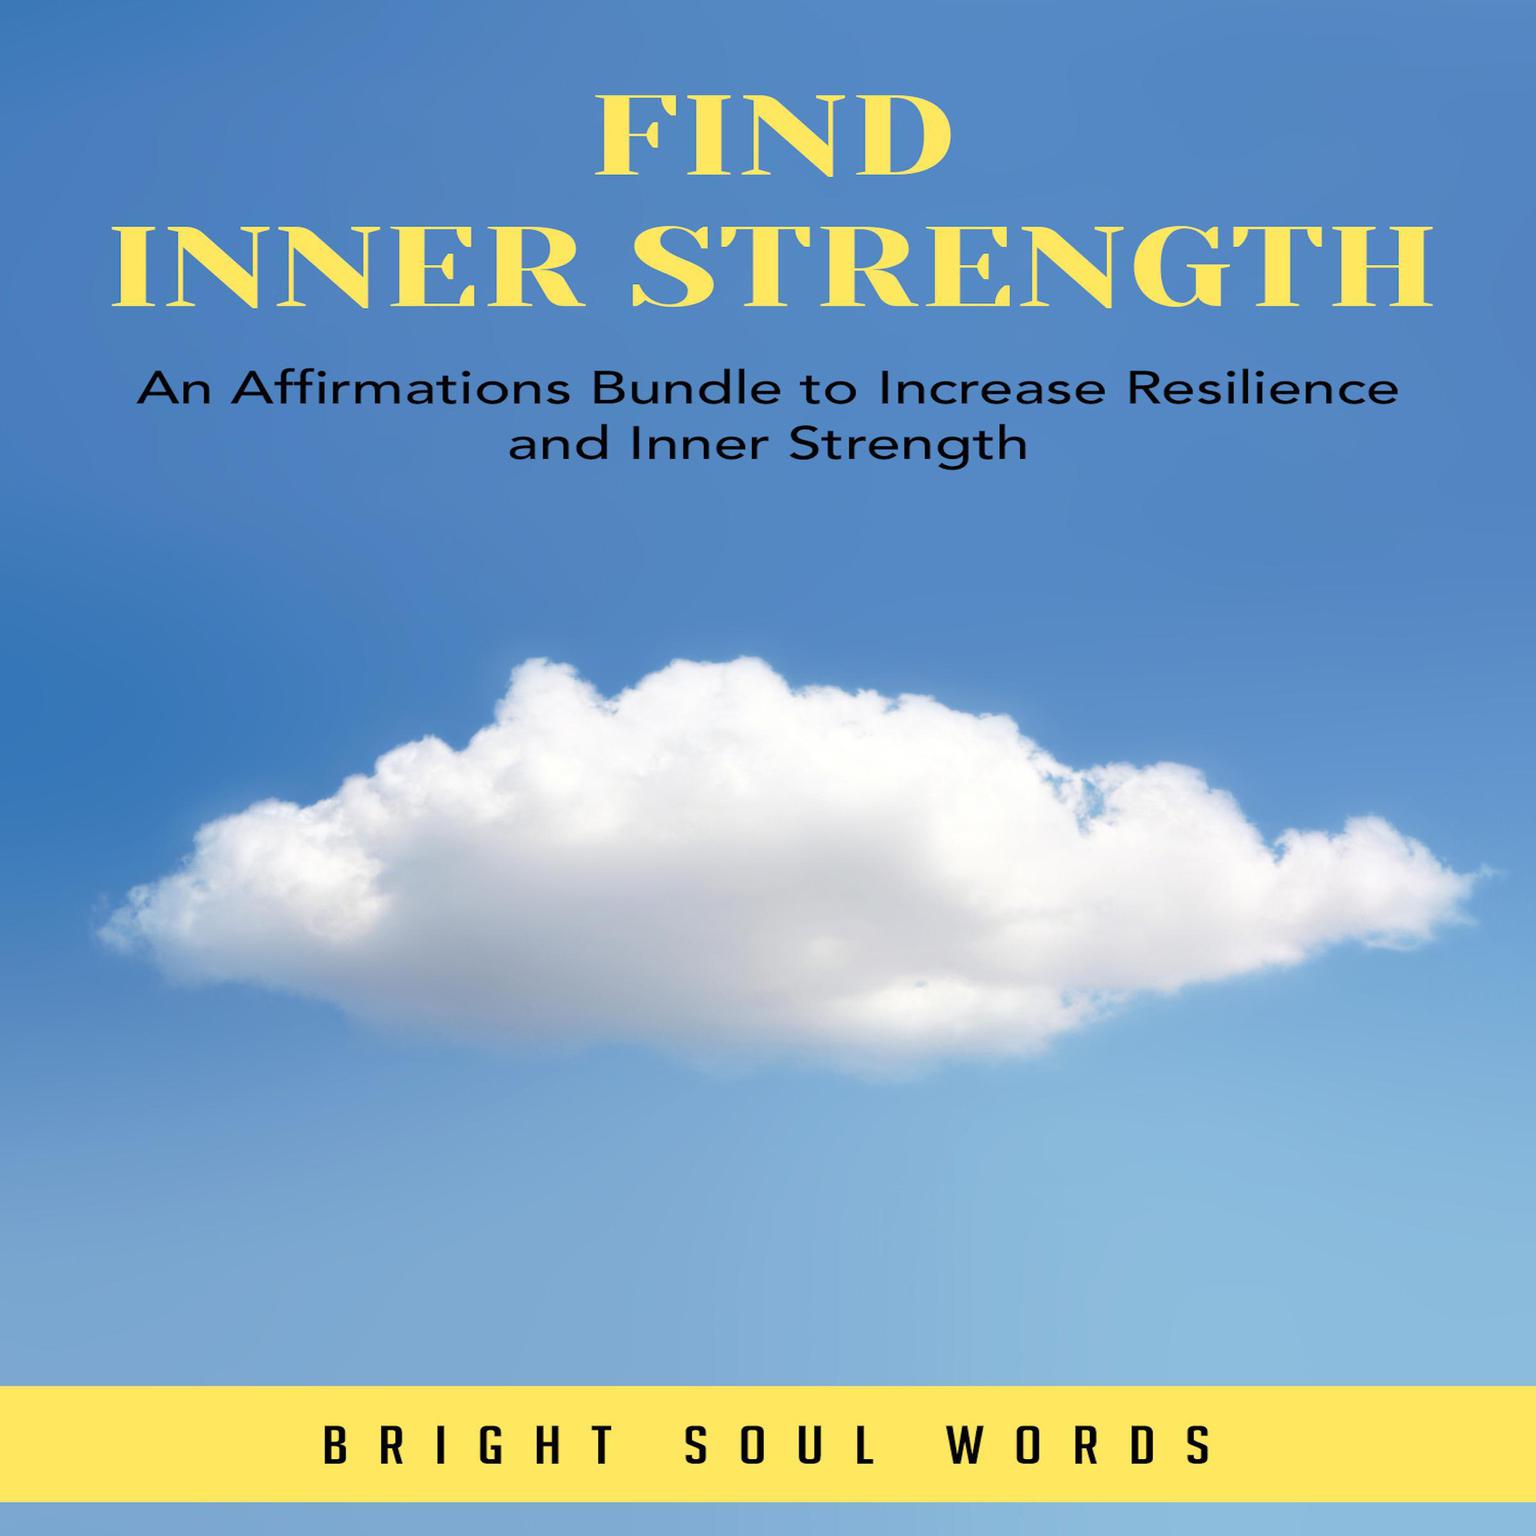 Find Inner Strength: An Affirmations Bundle to Increase Resilience and Inner Strength Audiobook, by Bright Soul Words